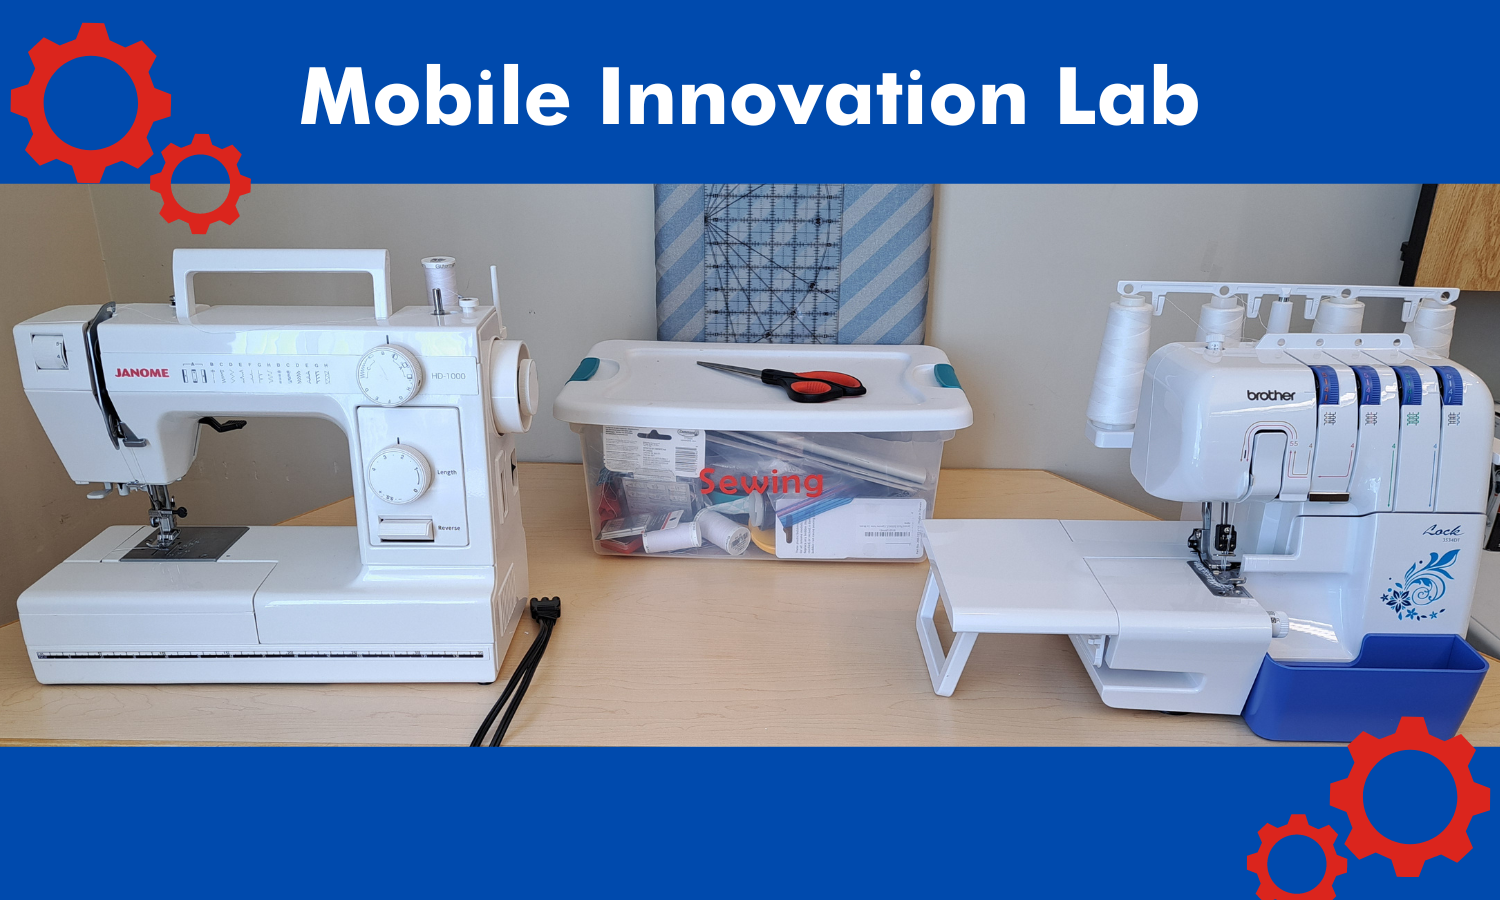 Sewing machine and serger from the Mobile Innovation Lab